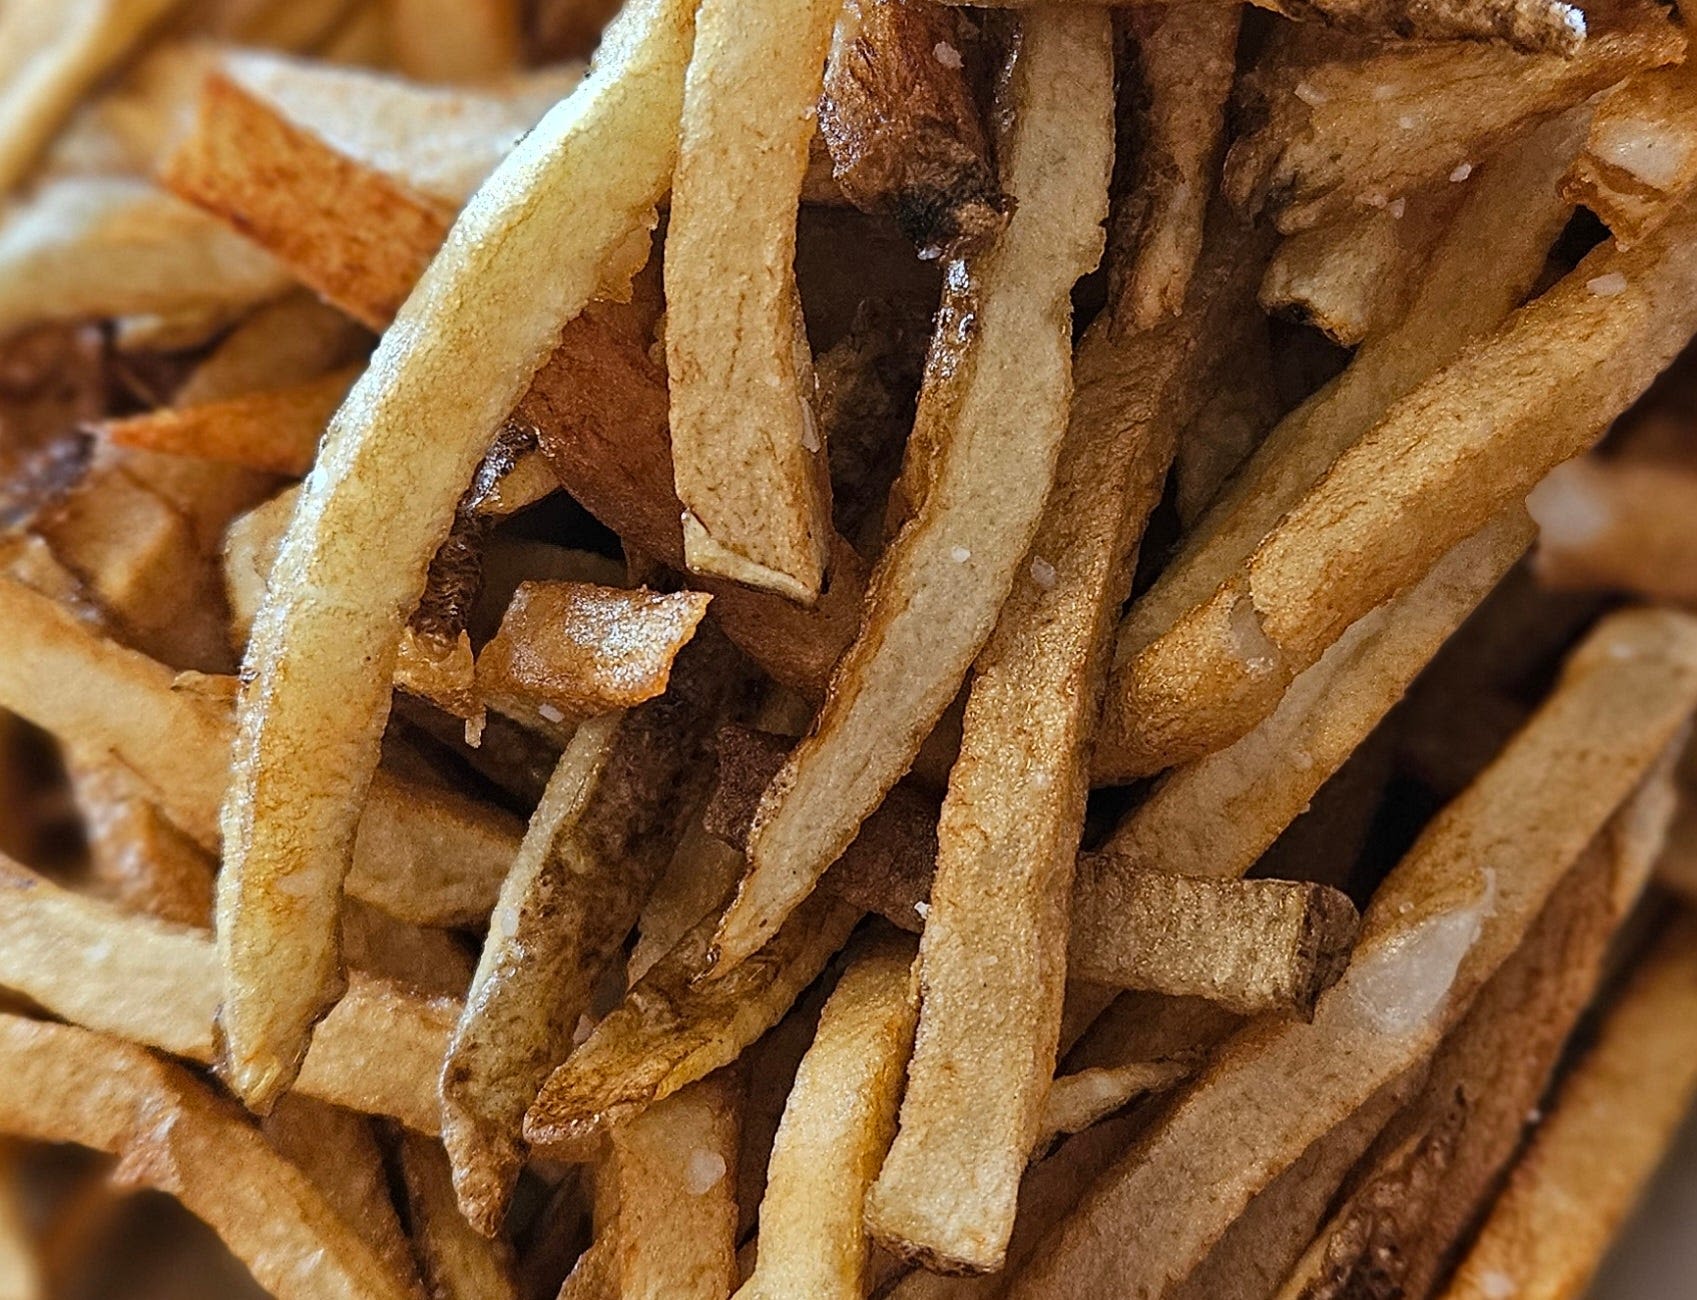 Sarasota and Bradenton's best French fry restaurant featured in USA TODAY